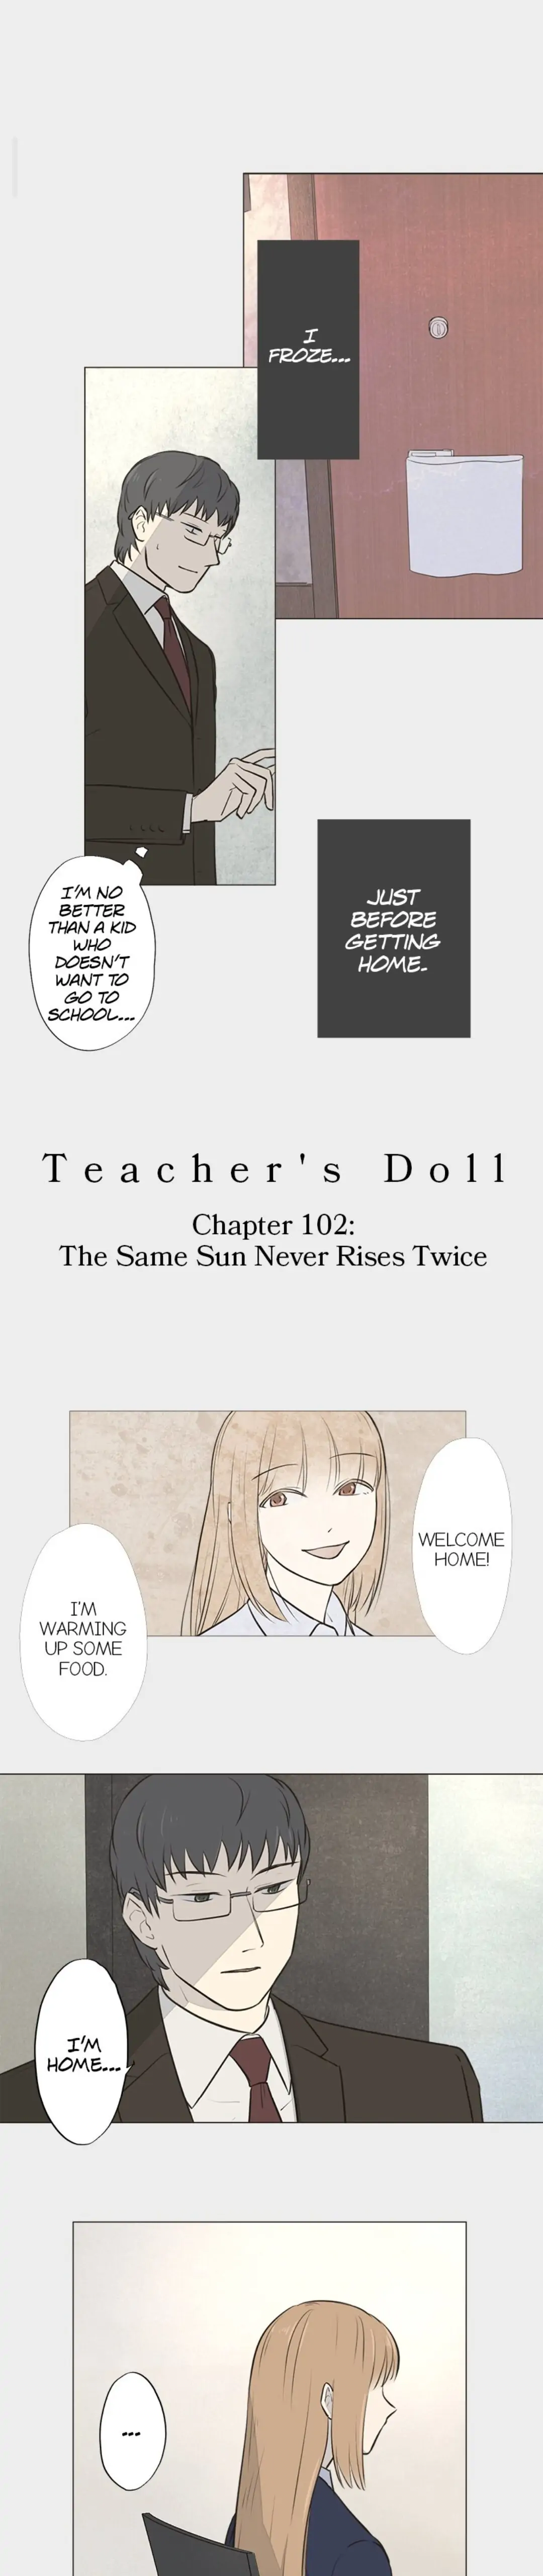 Doll of the Teacher Chapter 102 - page 1